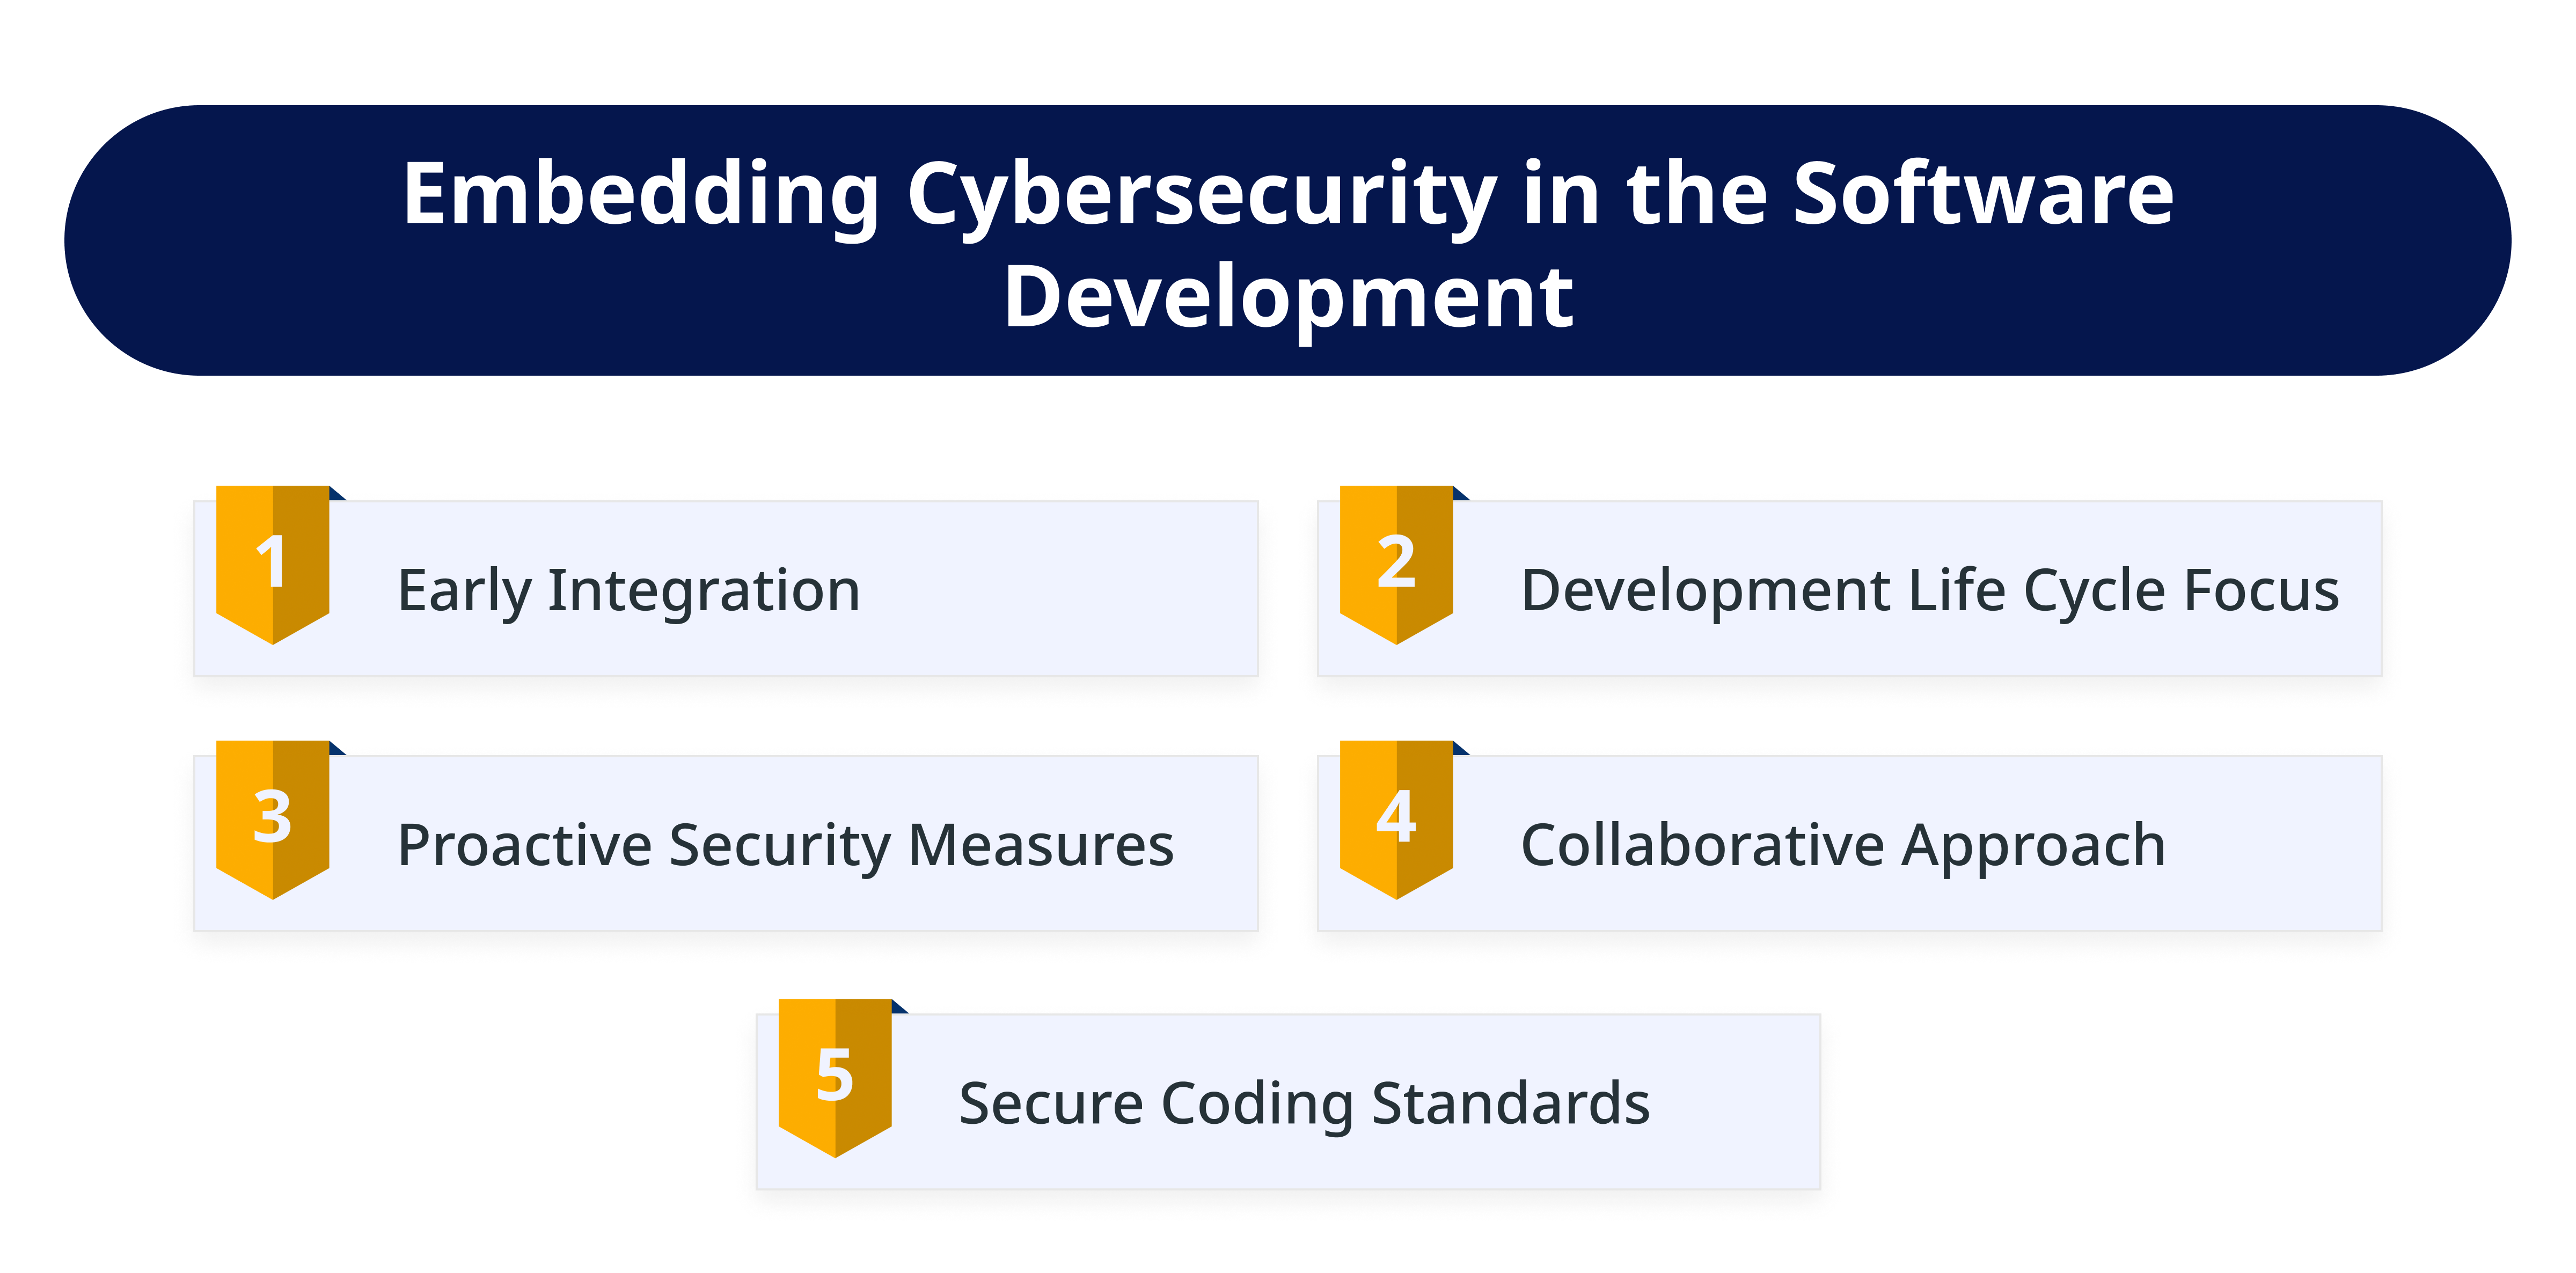 Embedding Cybersecurity in the Software Development